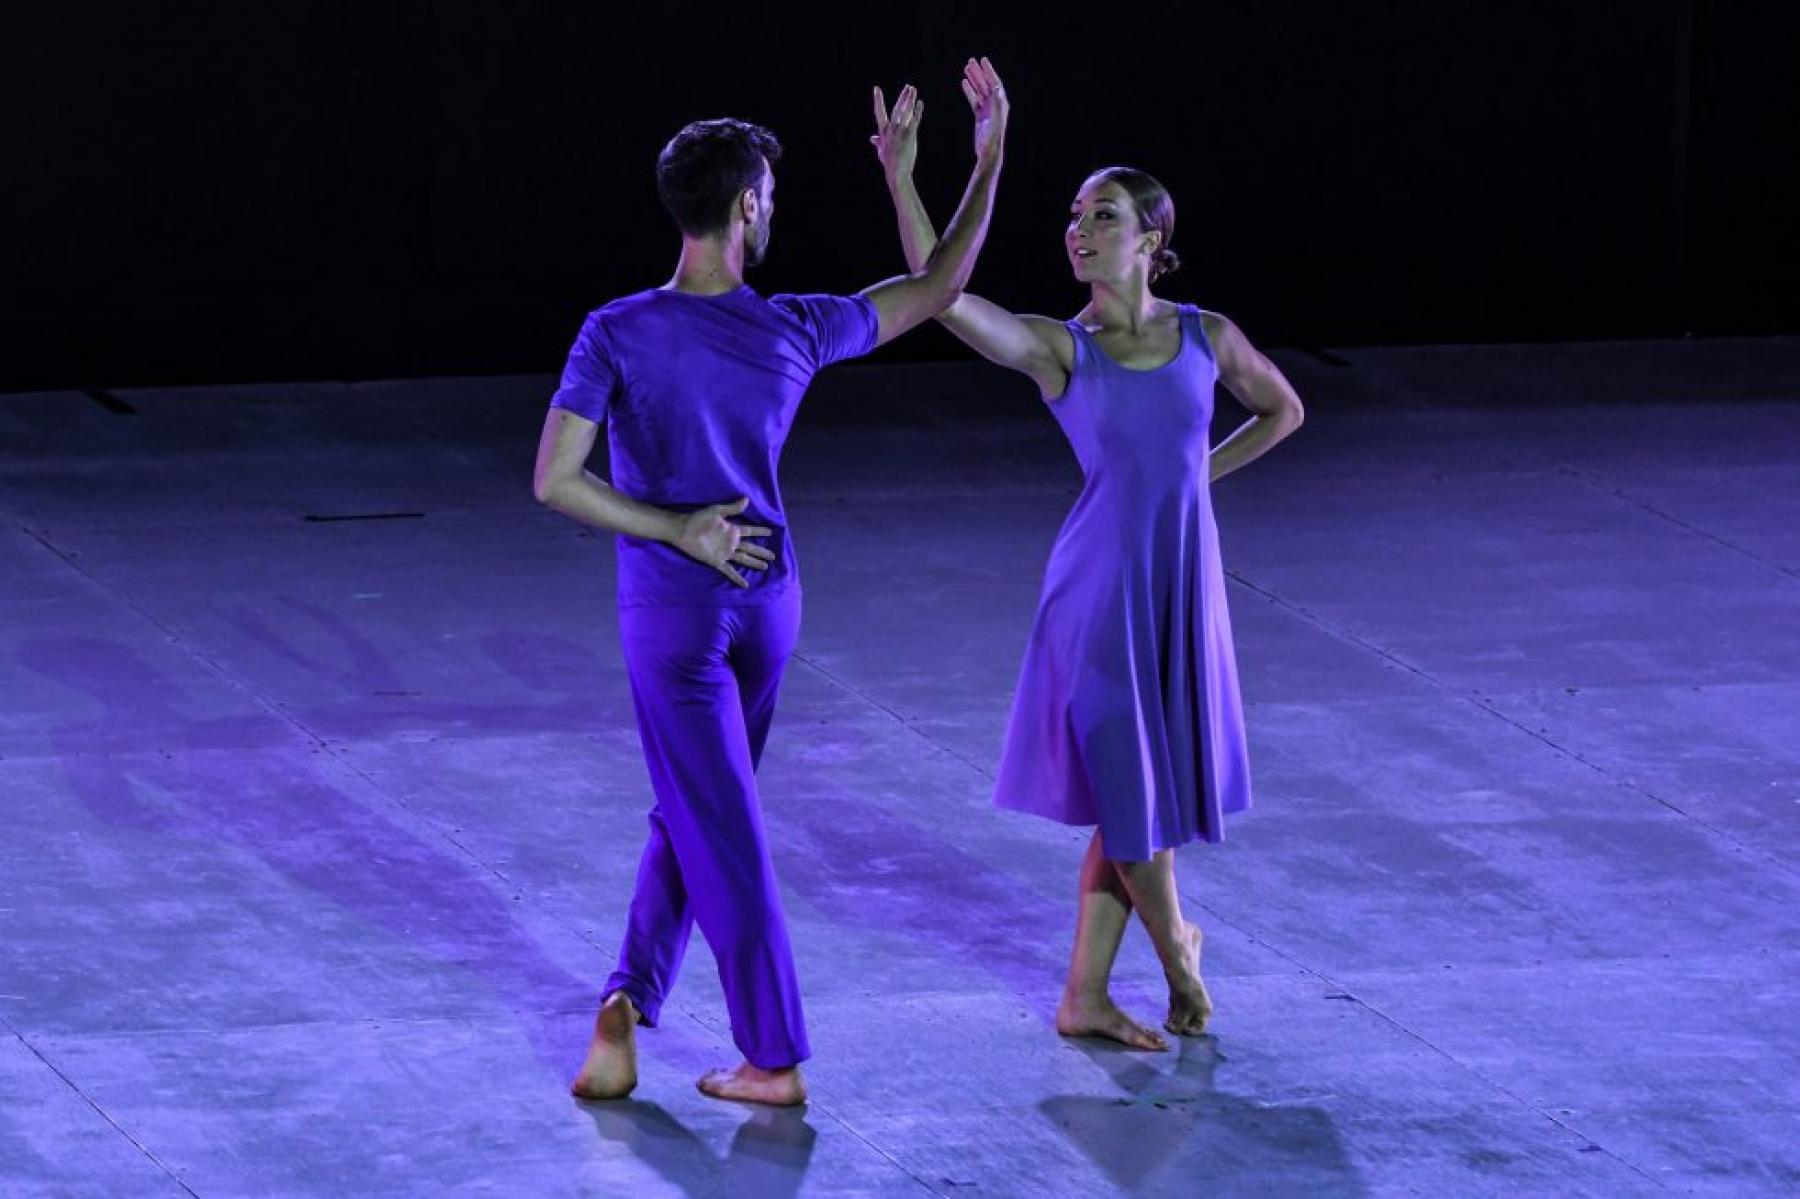 The Foundation continues its commitment to the arts by supporting the 20th edition of “Premio Roma Danza” at the National Academy of Dance in Rome.